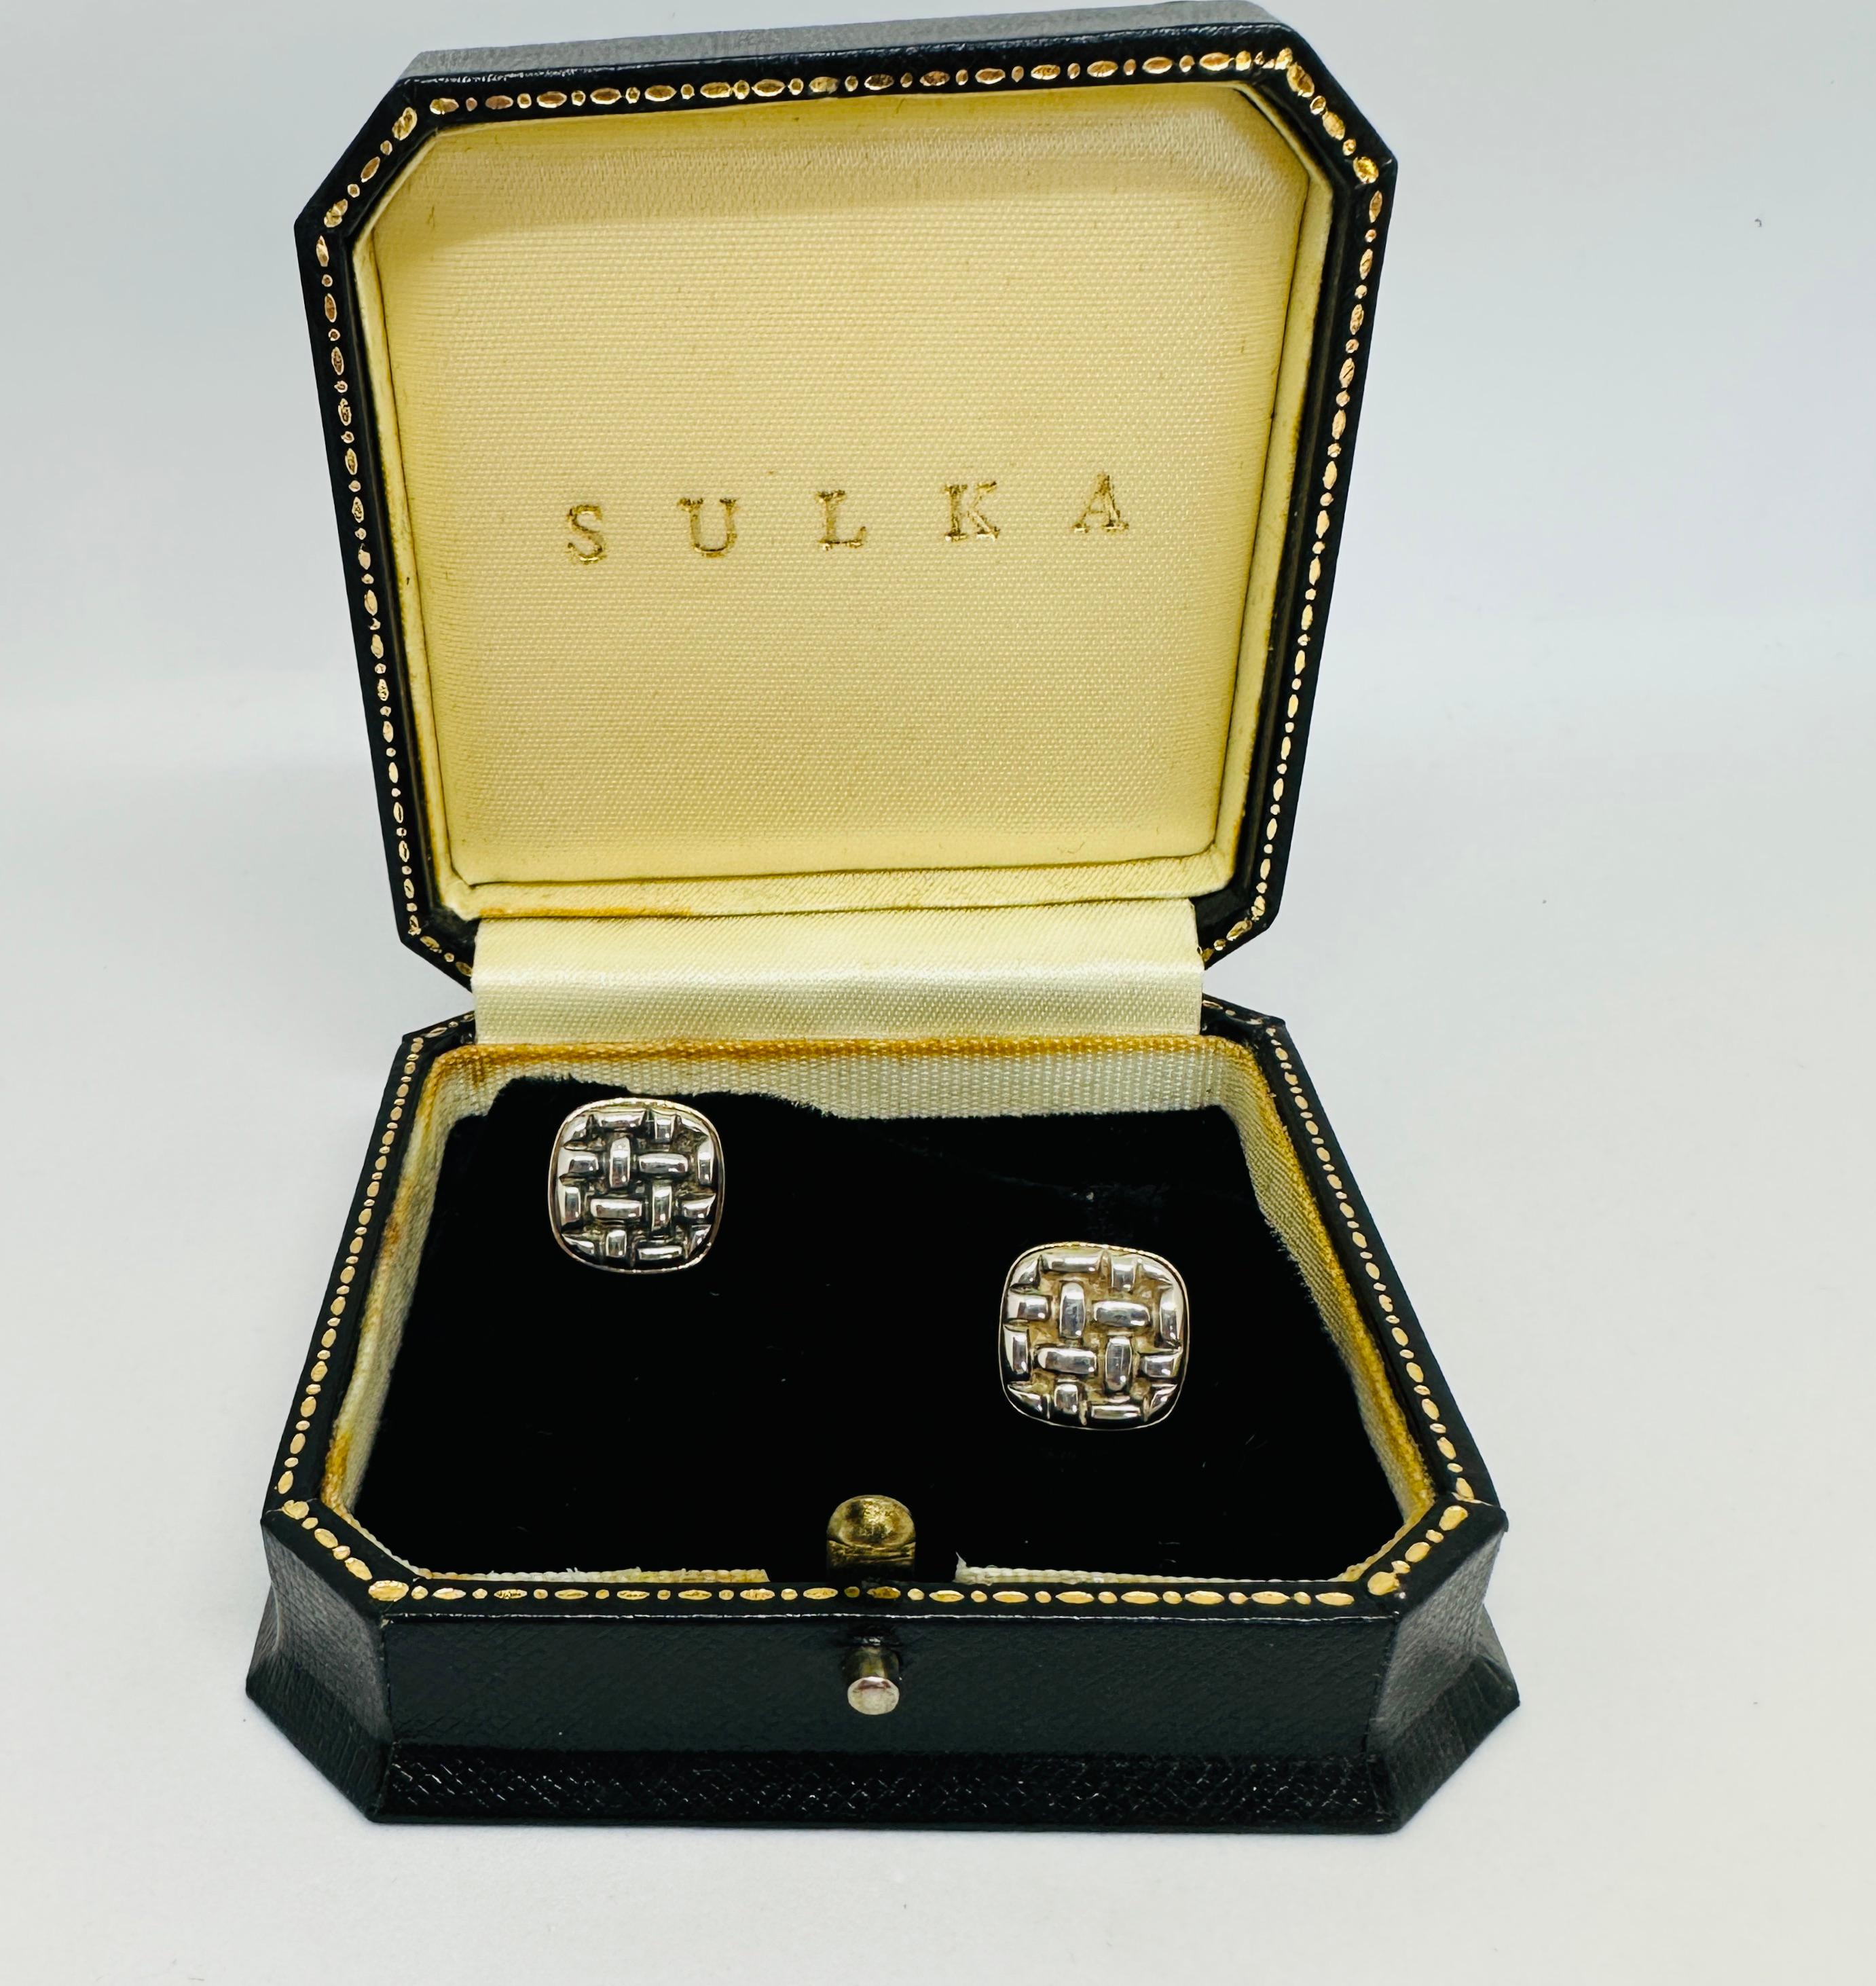 Rare and highly collectible basketweave design cufflinks in 18K yellow gold with sterling silver made by Trianon and retailed by Amos Sulka & Company. These cufflinks have never been worn and come in their original fitted Sulka case.

The cufflinks